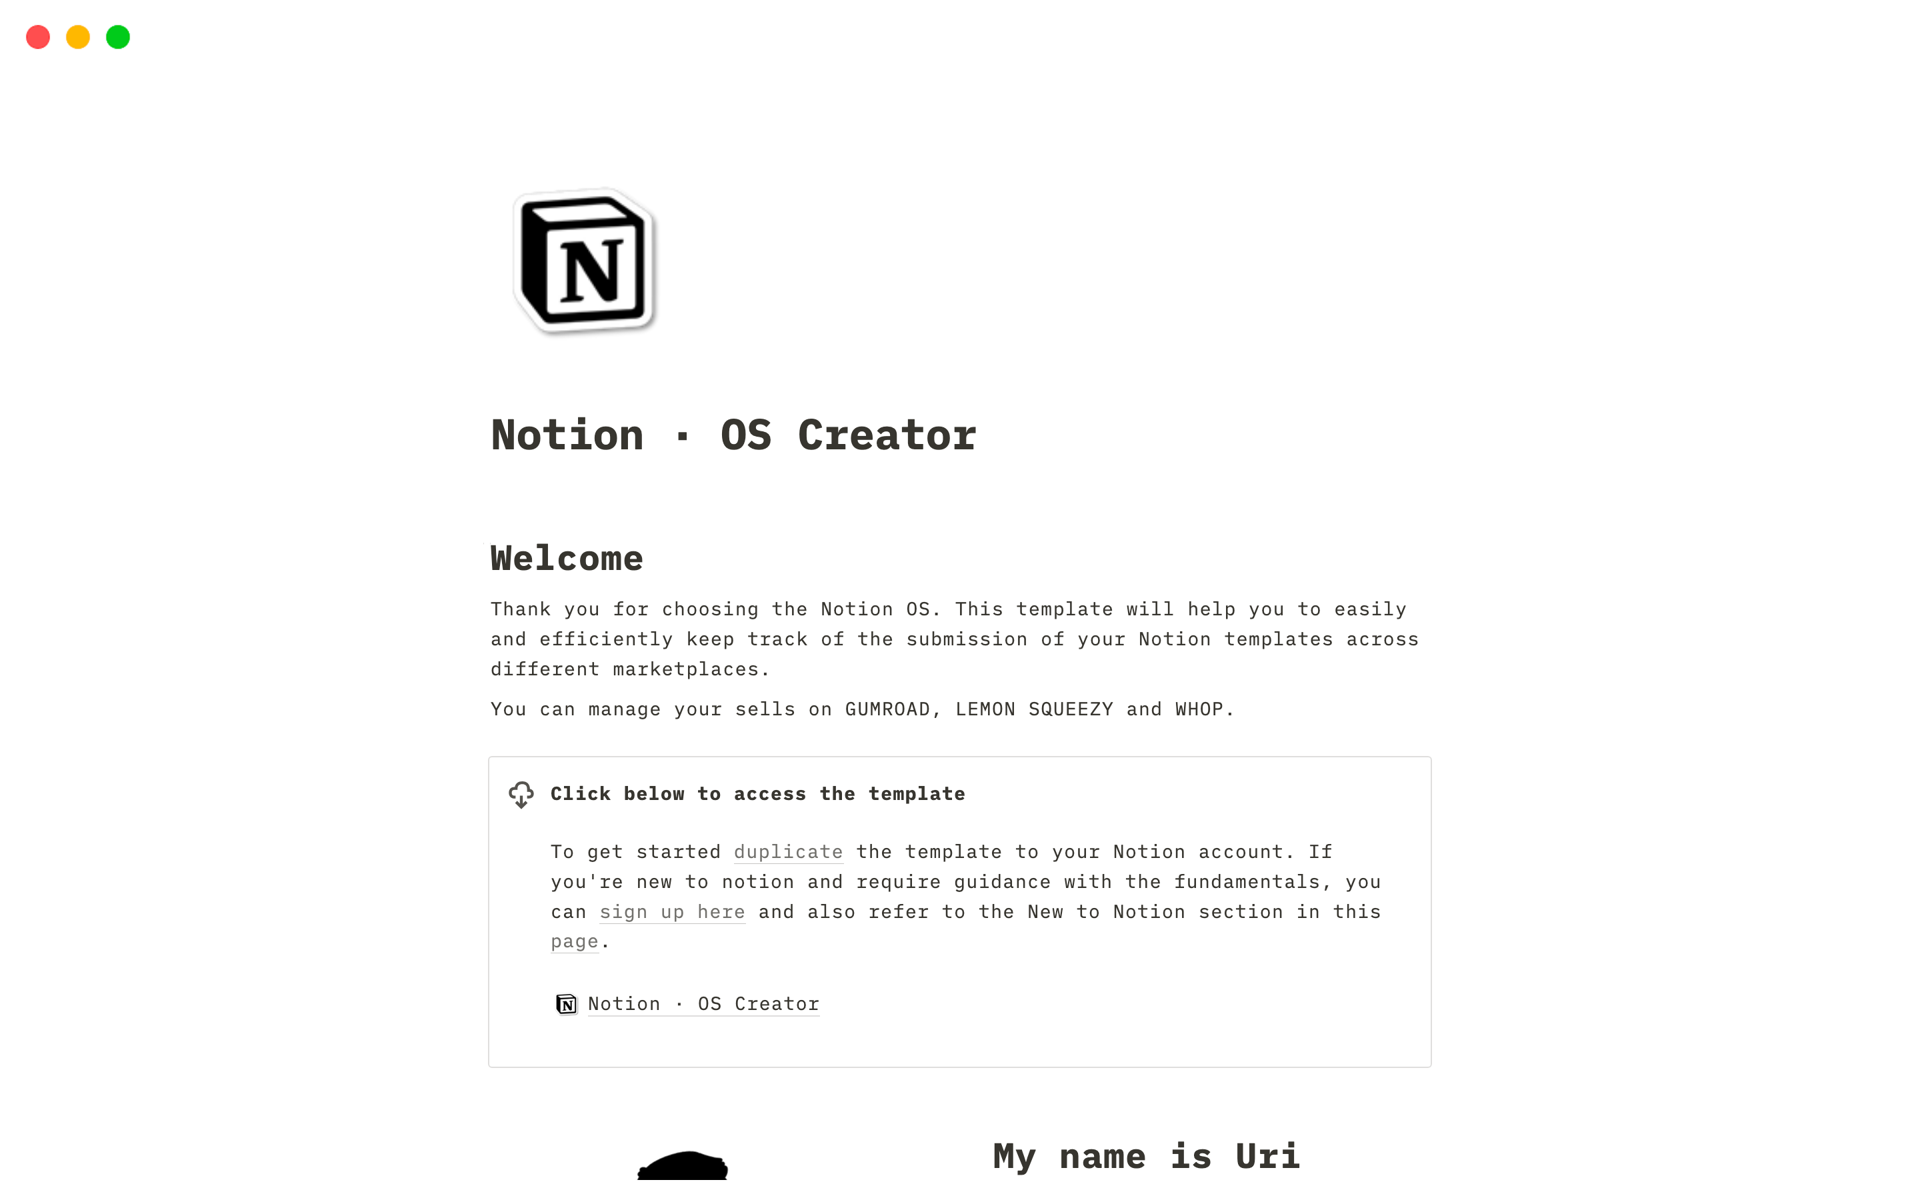 The Notion OS Creator template tackles the pain of managing and tracking template submissions across multiple marketplaces, providing creators with a simple and streamlined solution.